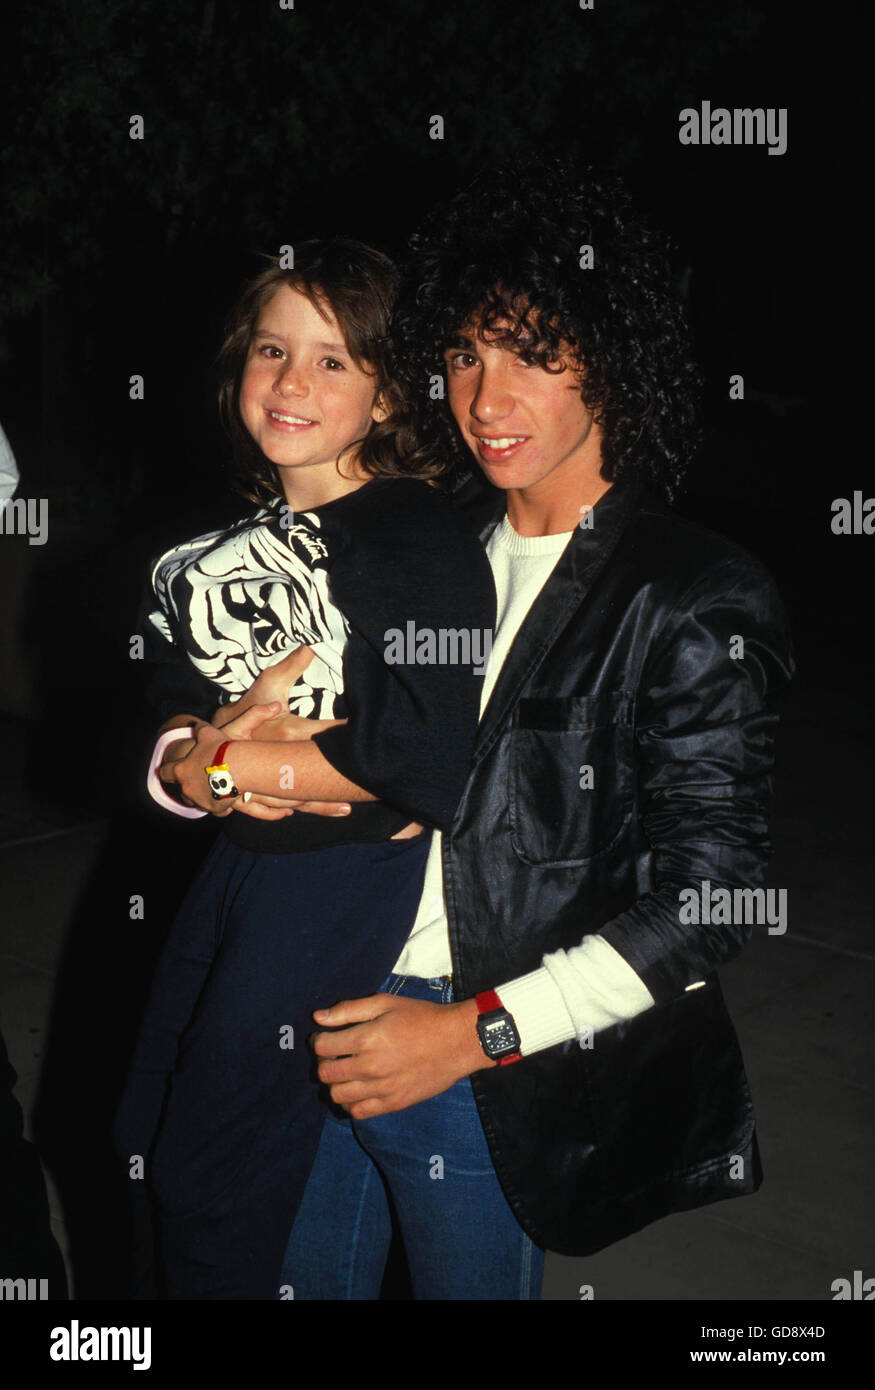 Soleil Moon Frye Stock Photos & Soleil Moon Frye Stock Images - Page 2 ...